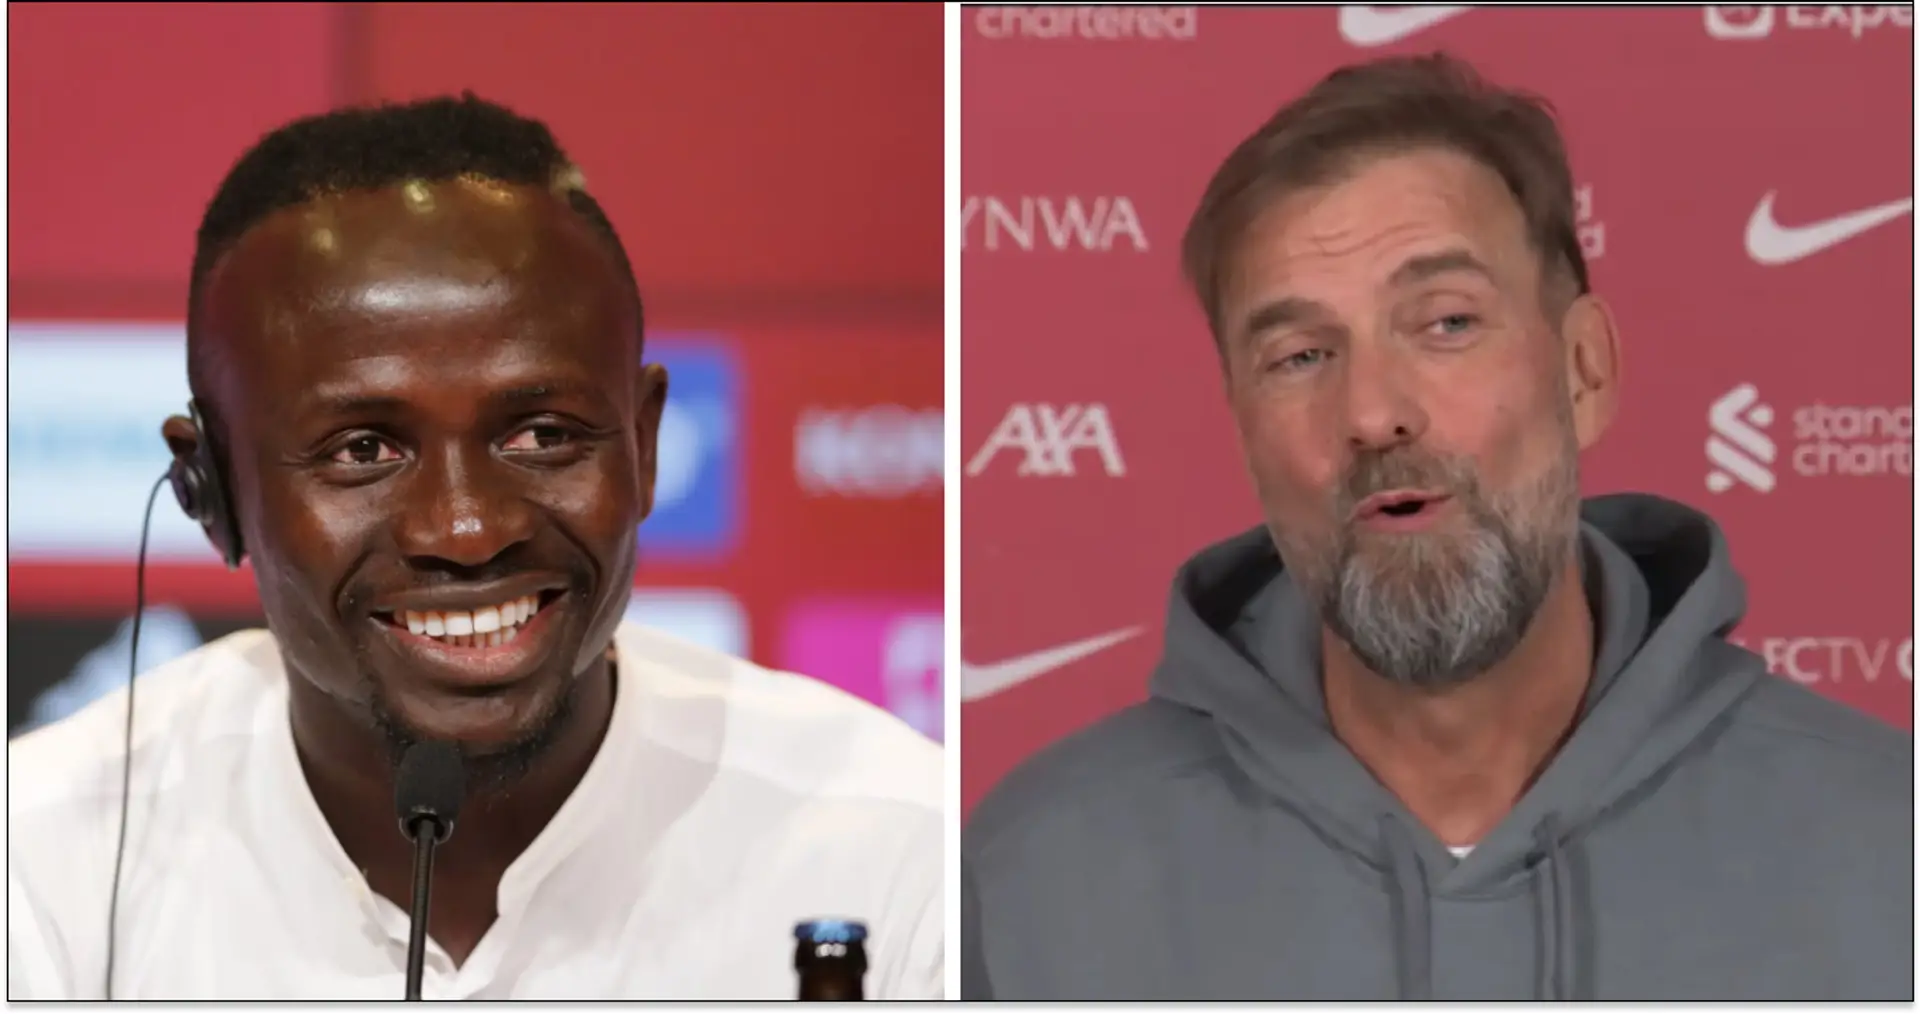 Mane: 'Liverpool will be back ... Klopp will lead Liverpool back up'